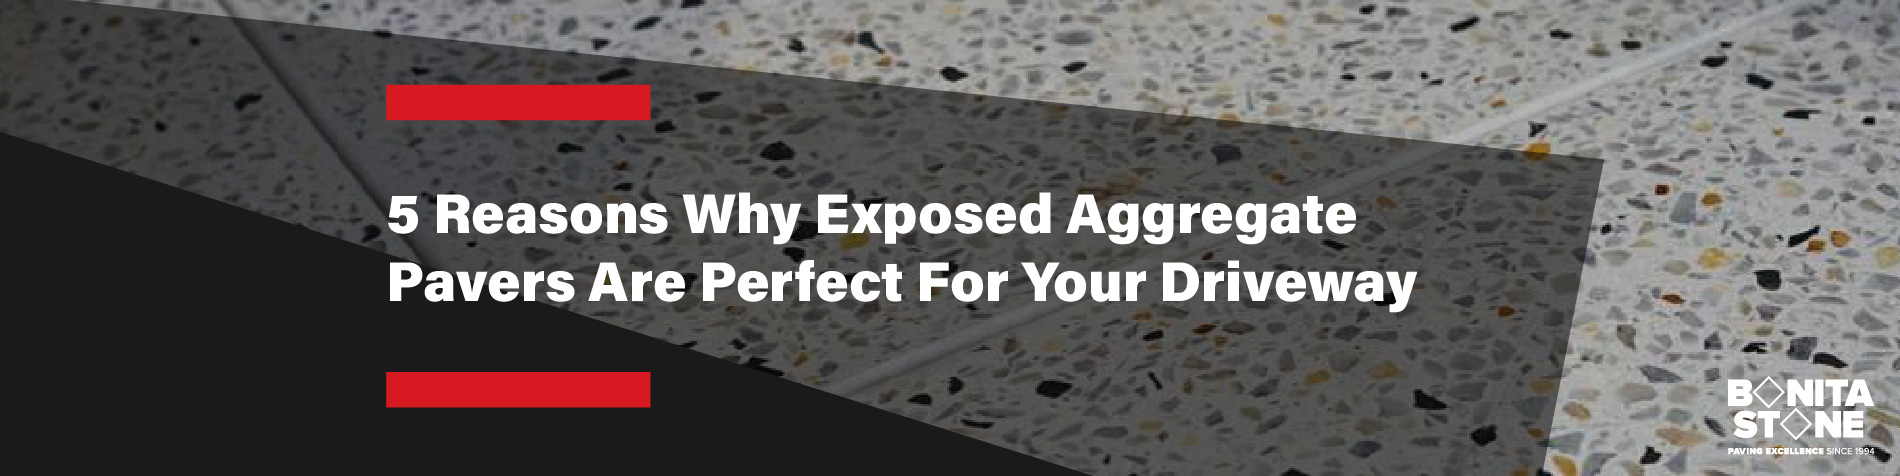 5-reasons-why-exposed-aggregate-pavers-blog-banner